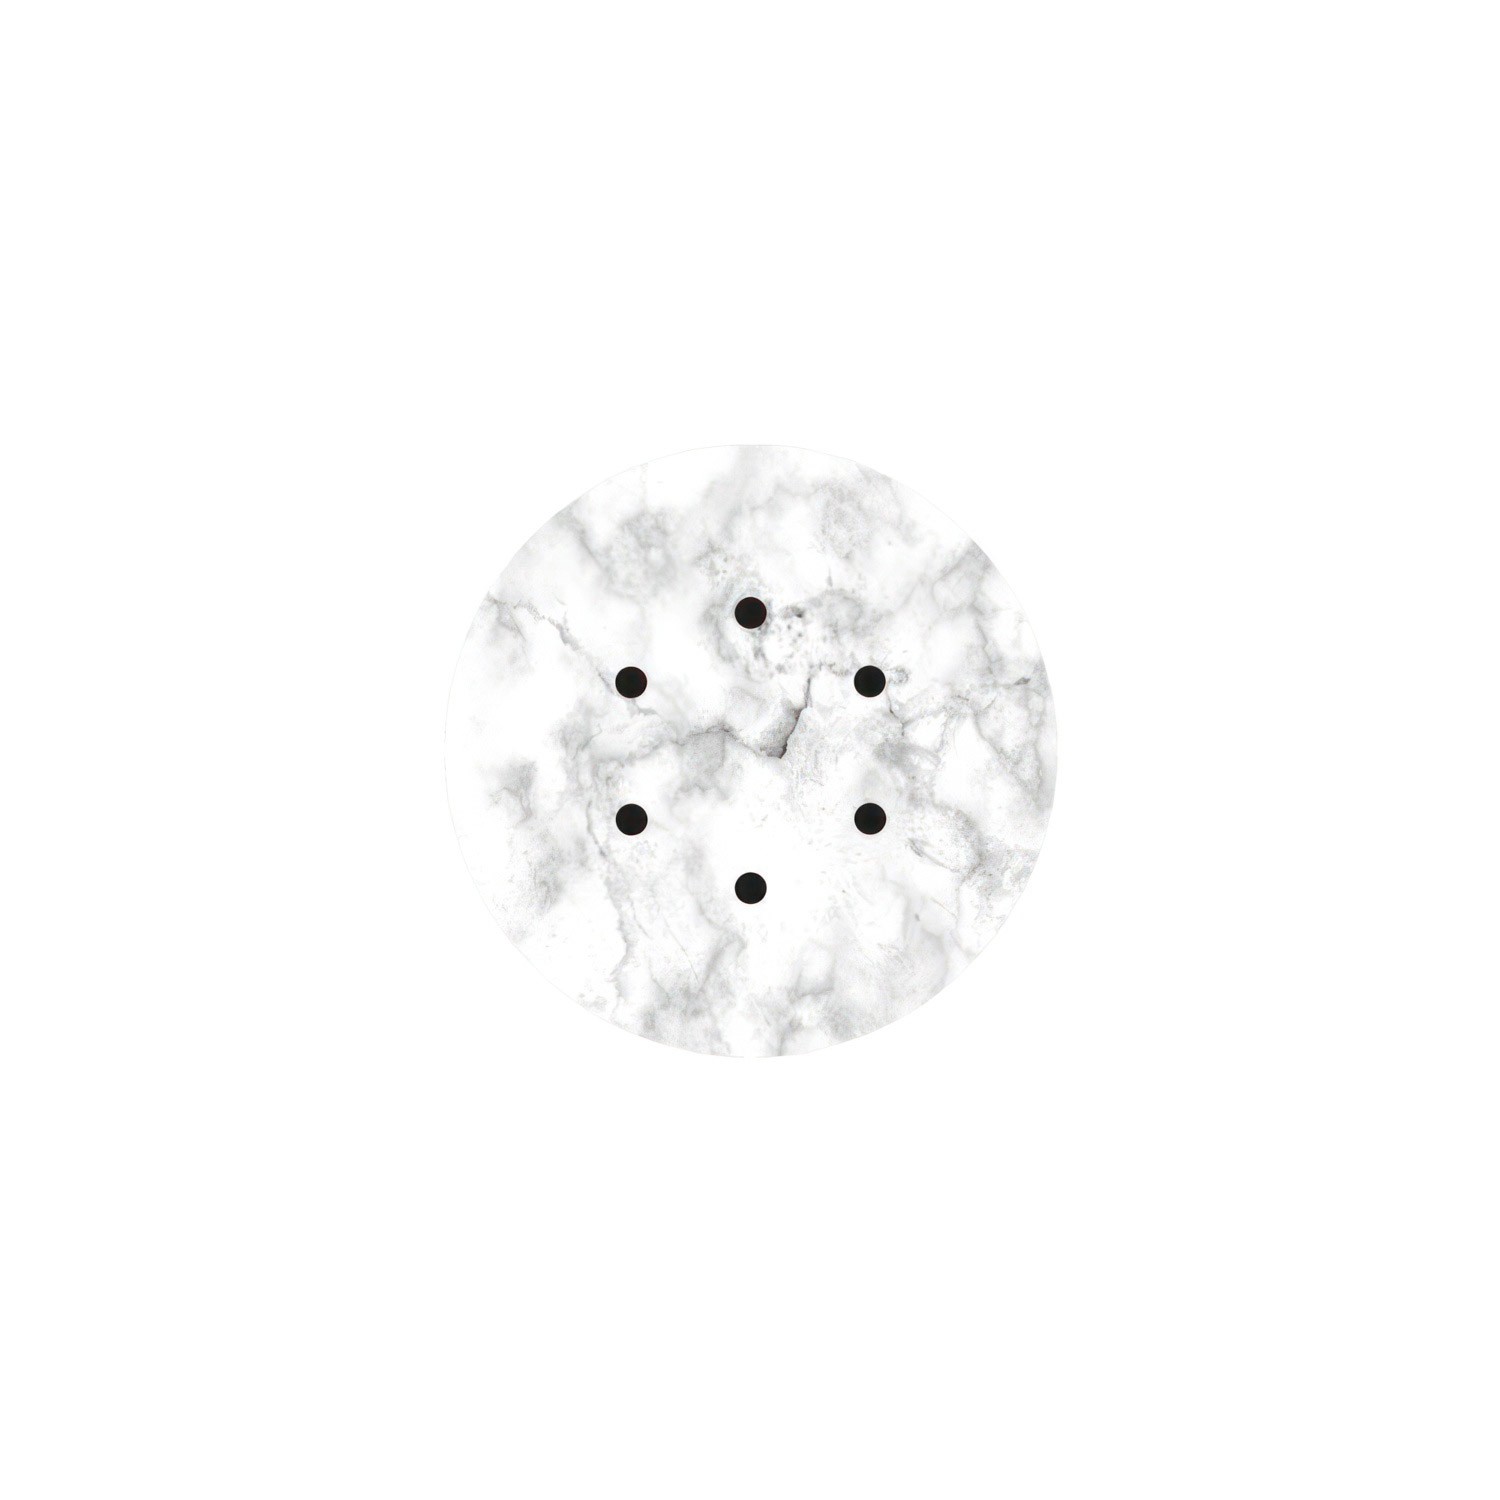 Round Rose-One 6-hole and 4 side holes ceiling rose, 200 mm